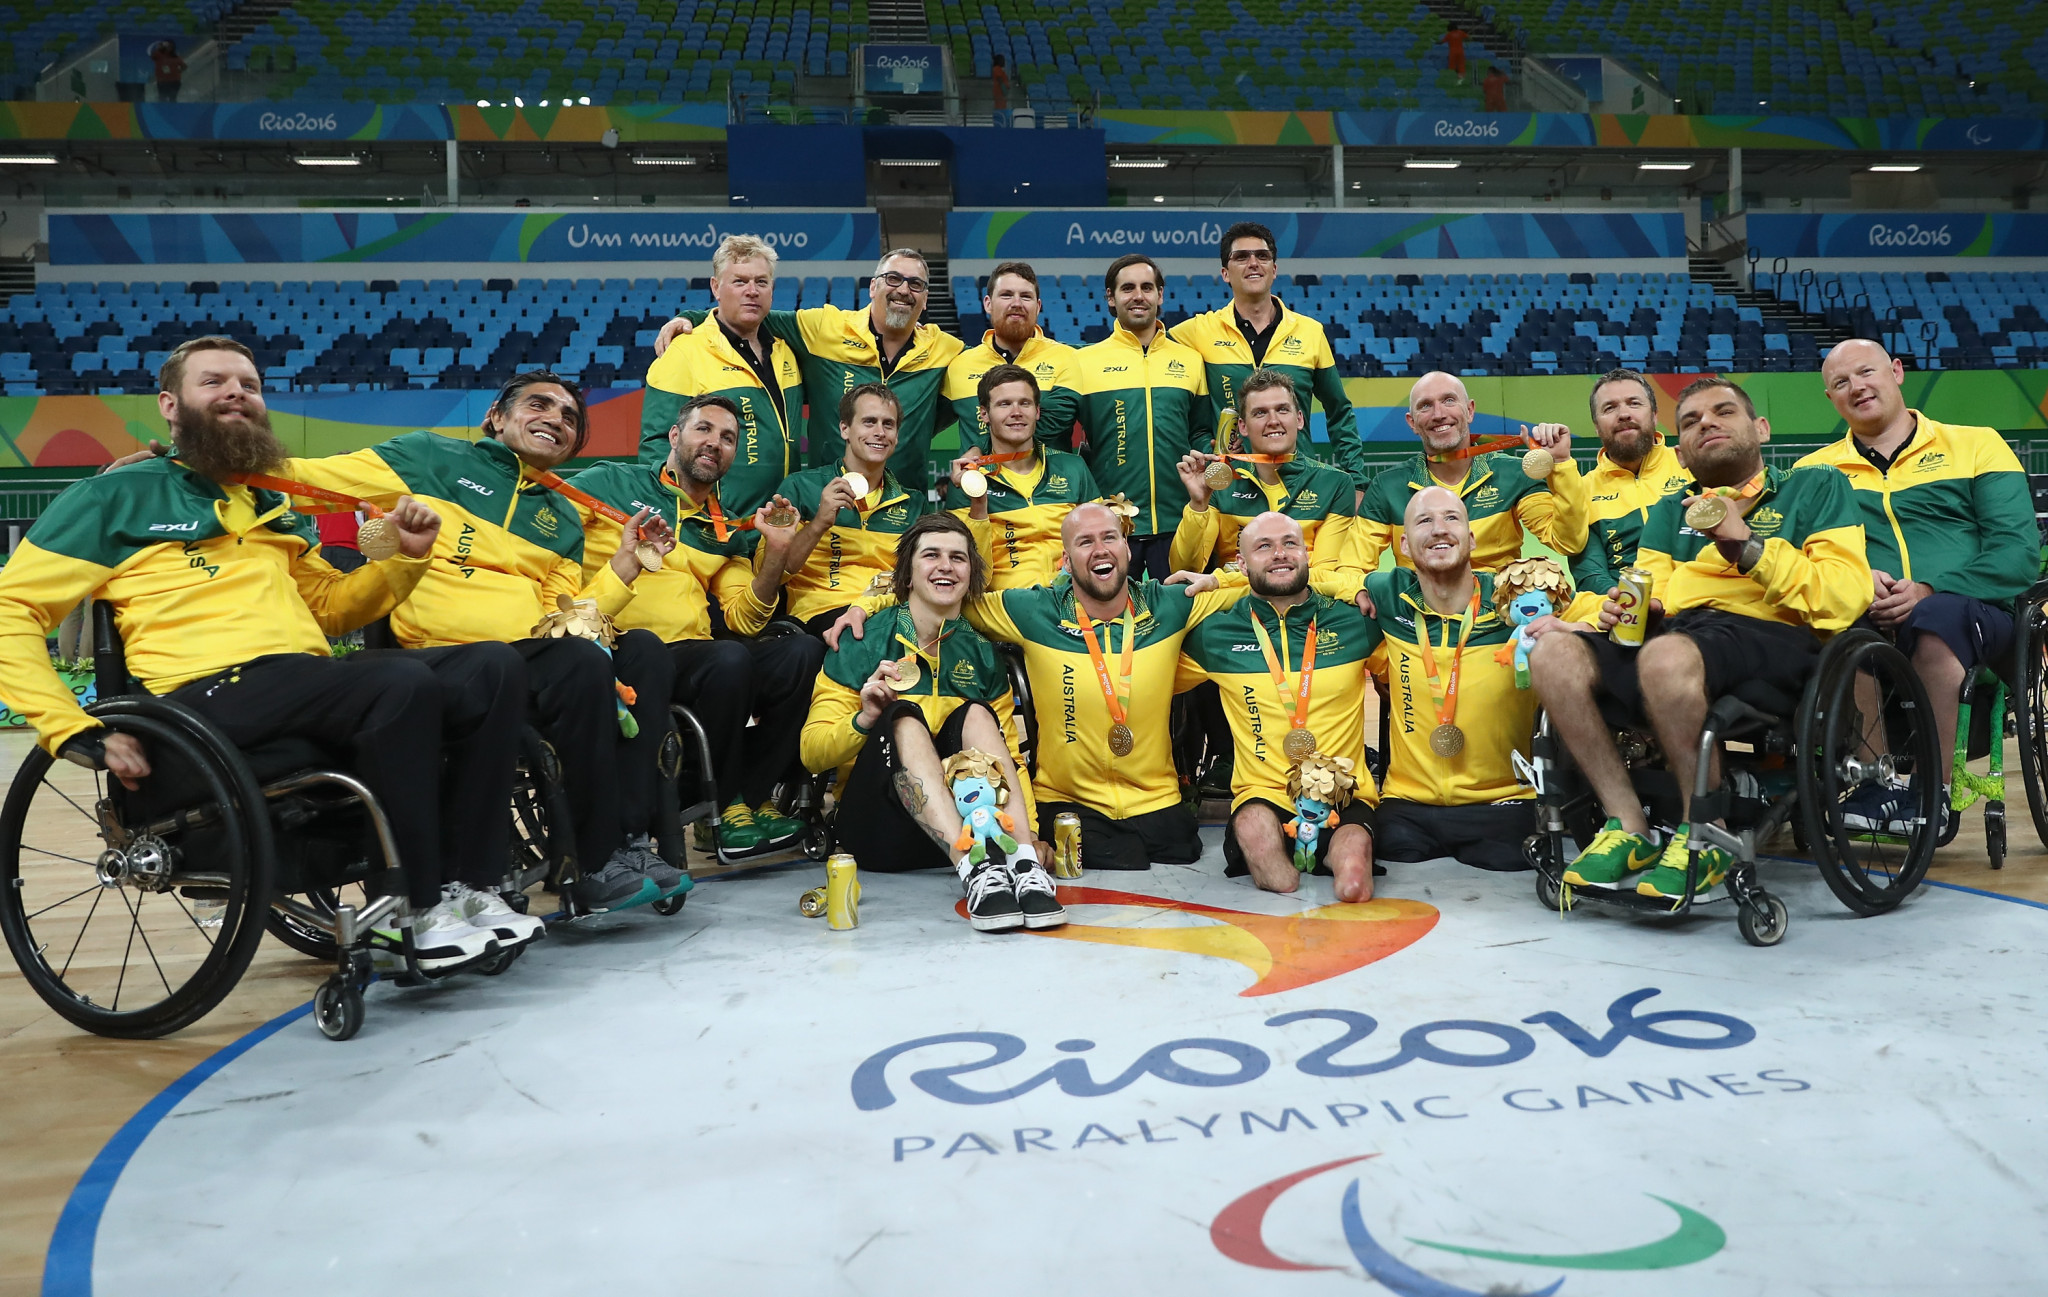 Hosts Australia look to dominate again at 2018 Wheelchair Rugby World